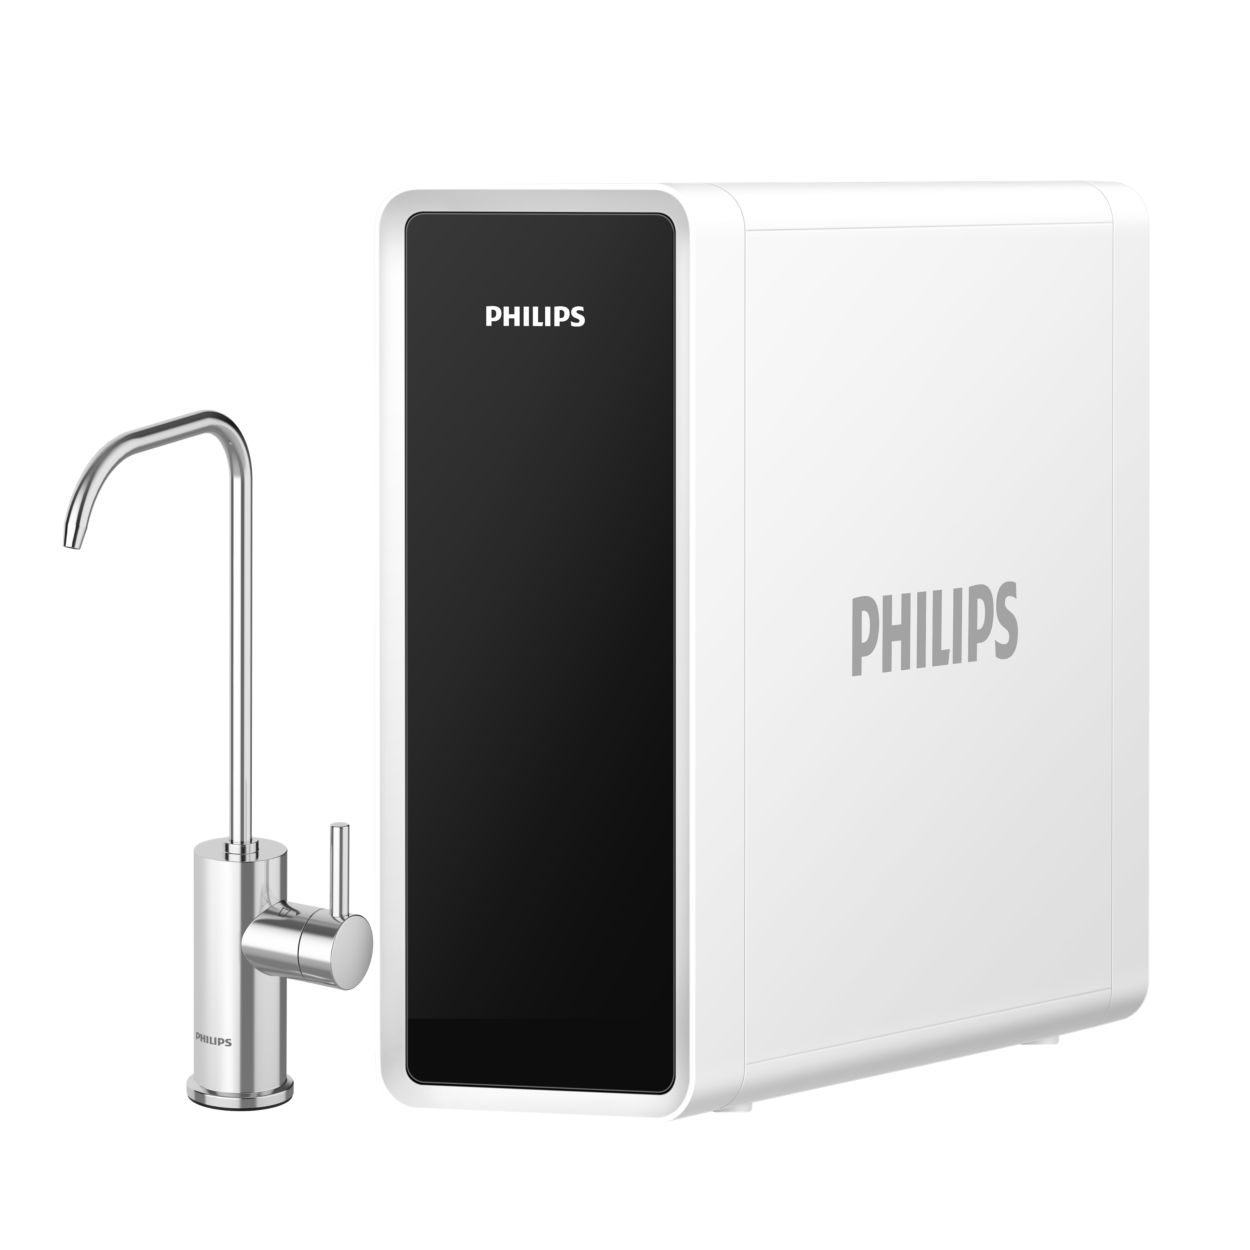 Philips Water Phillips - AUT883 - Filtro Grifo, Osmosis inversa